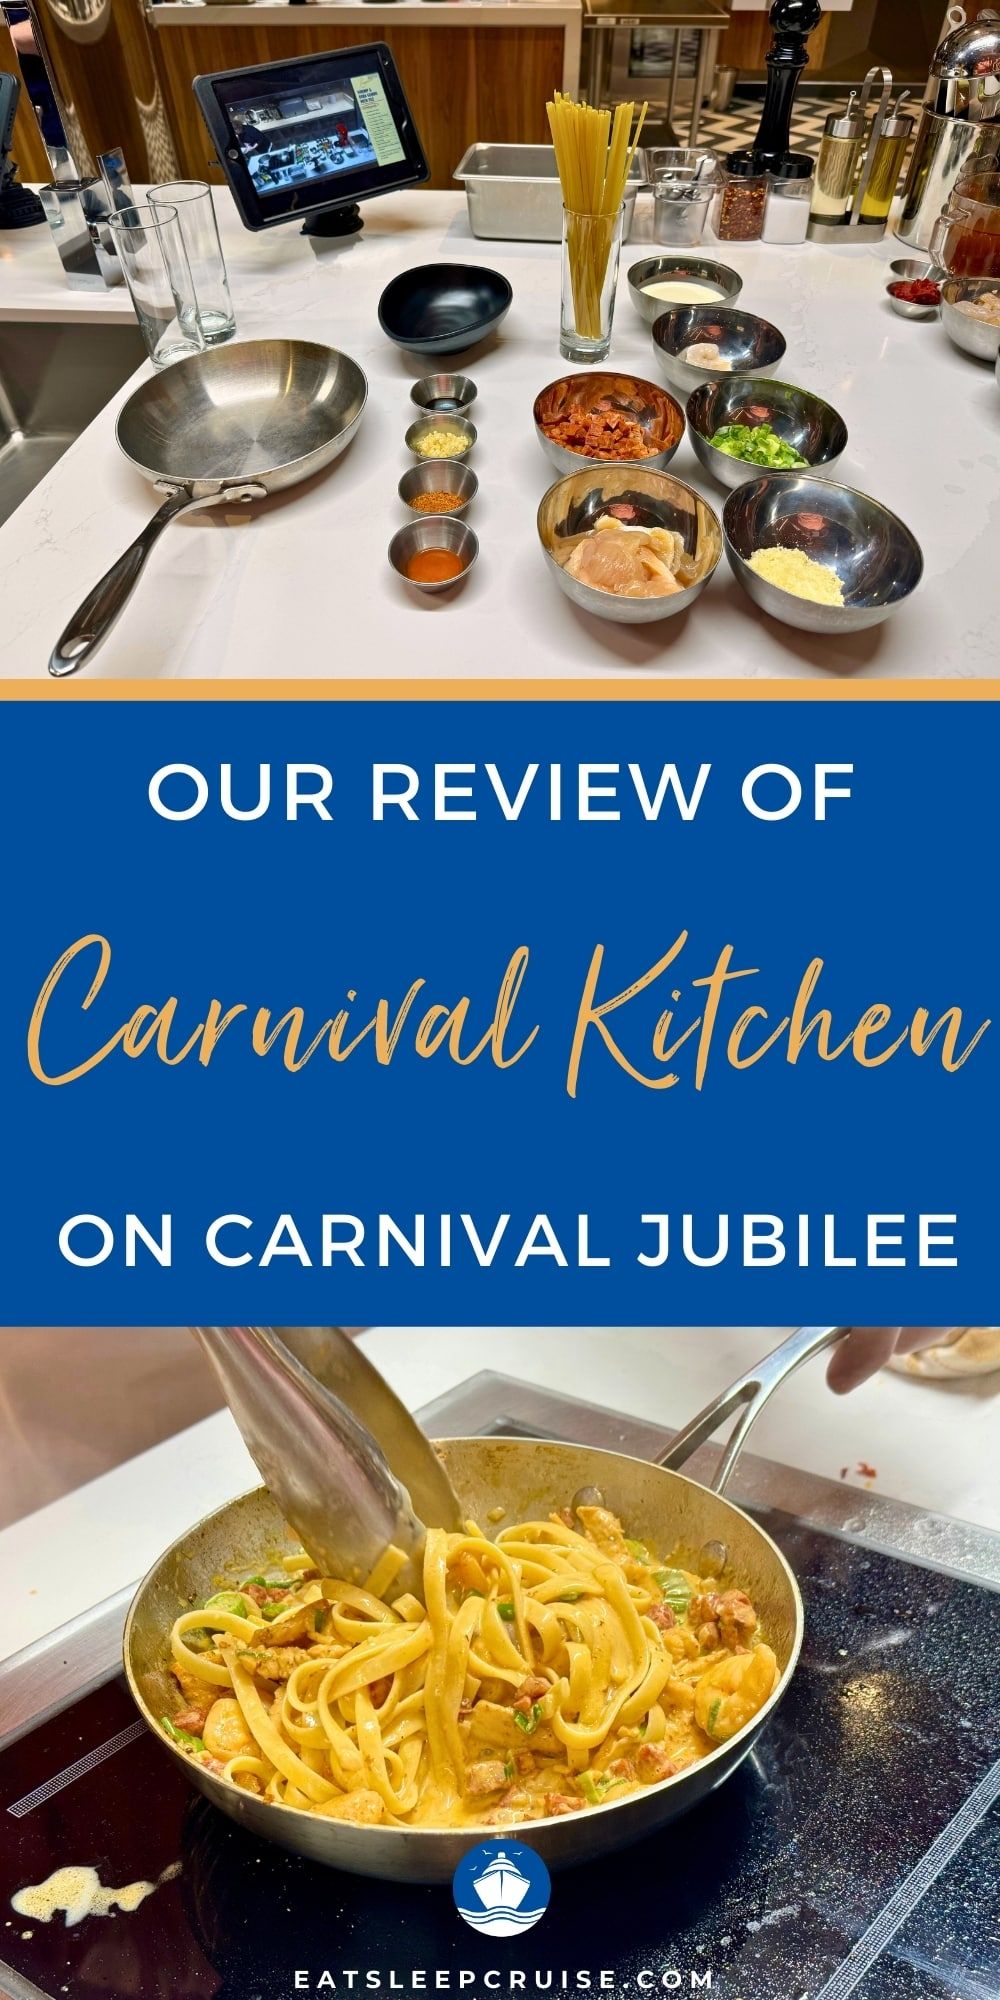 We Tested Out Carnival Kitchen on Our Last Cruise - Is it Worth it?